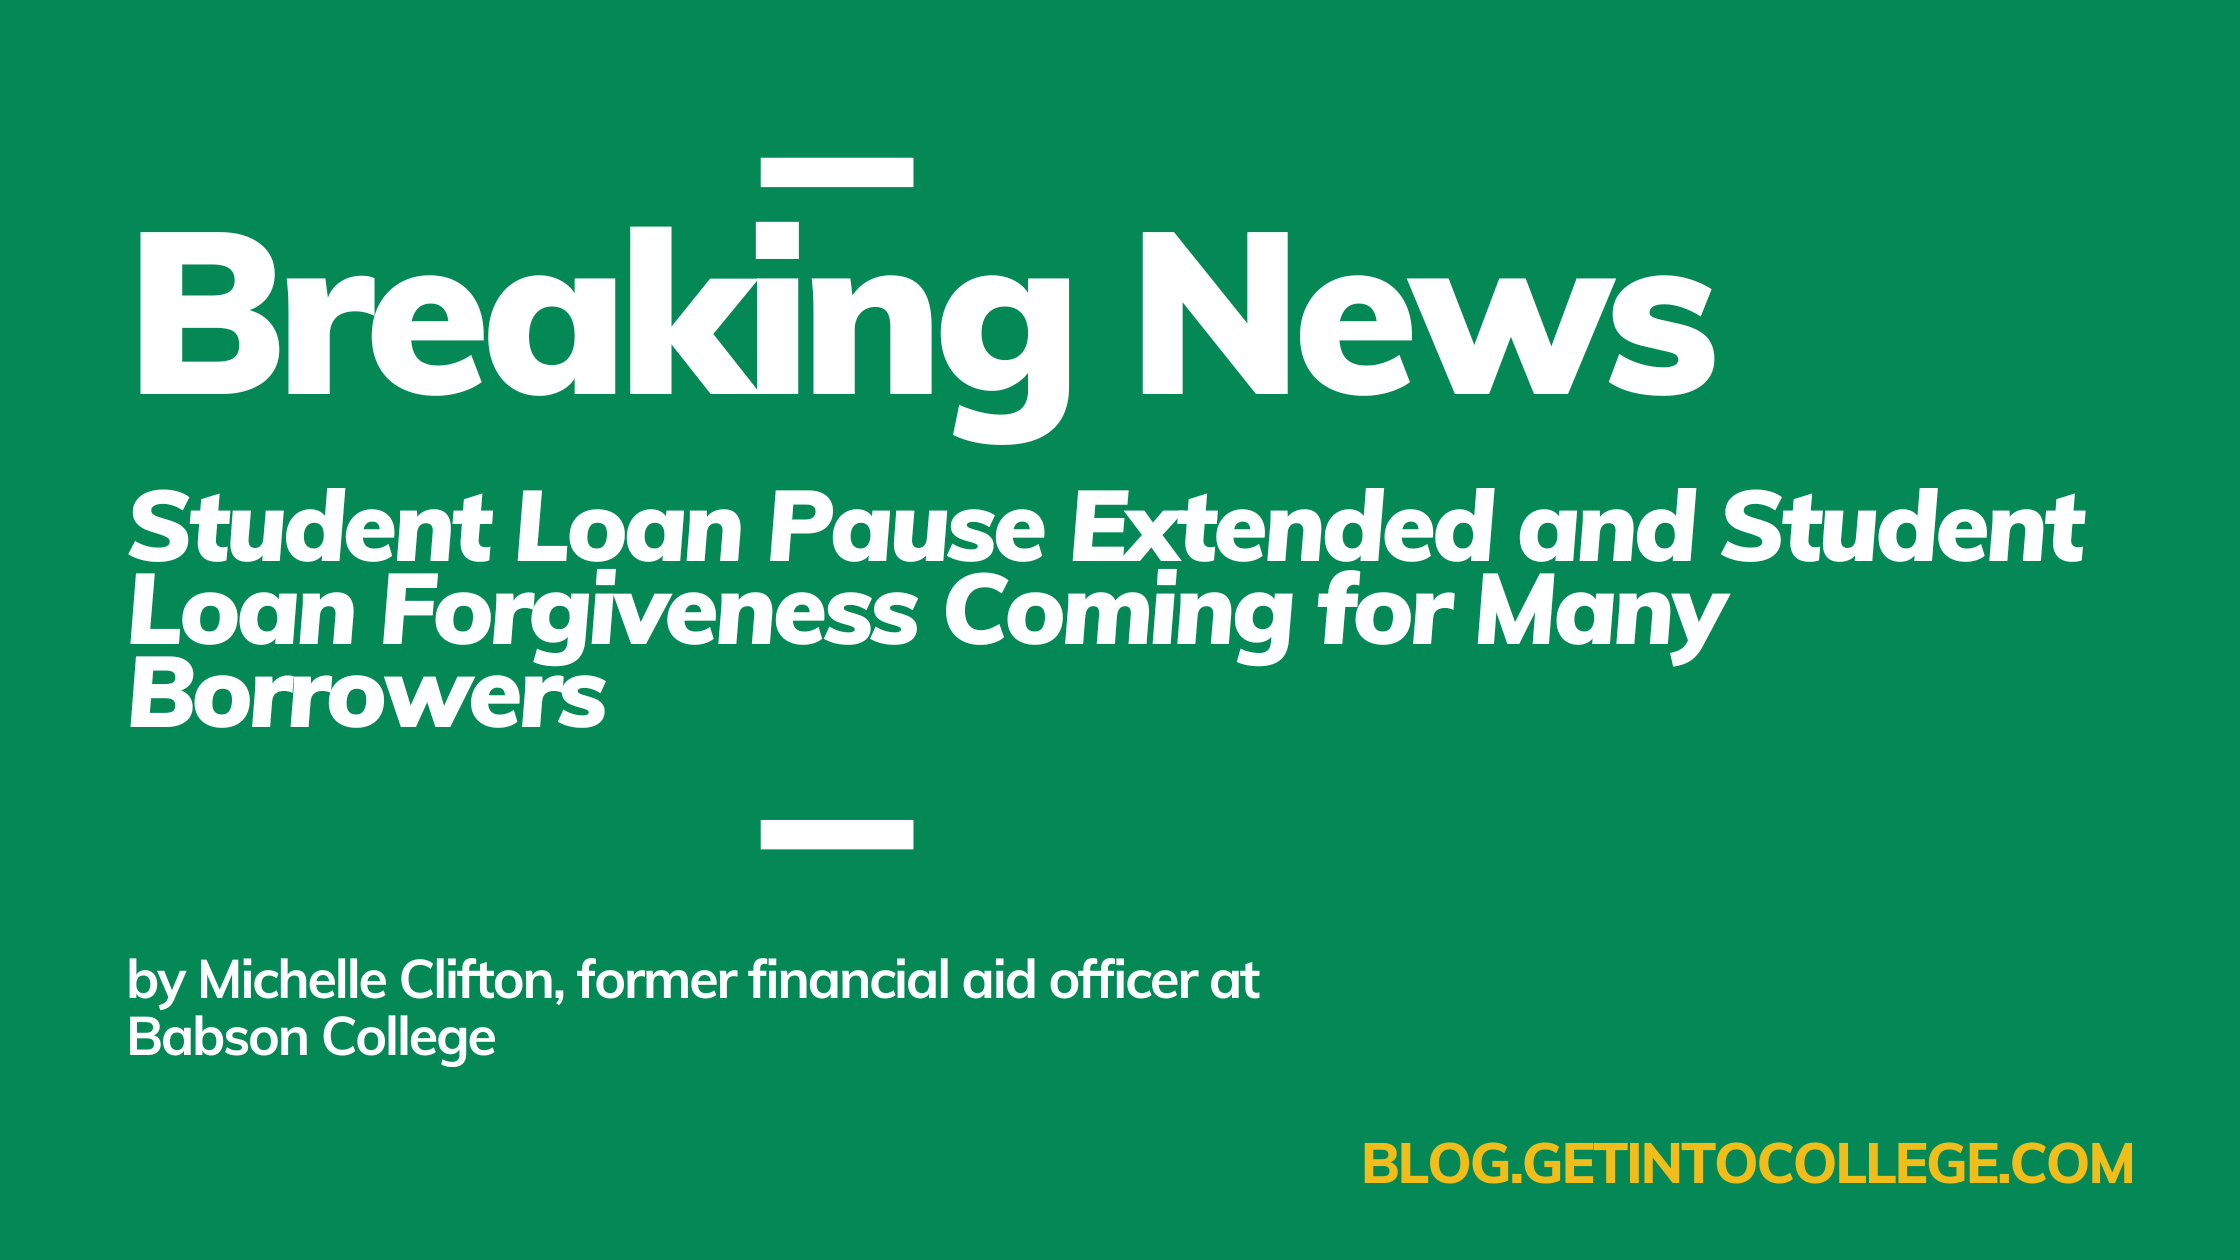 student loan pause extended and student loan forgiveness coming for many borrowers